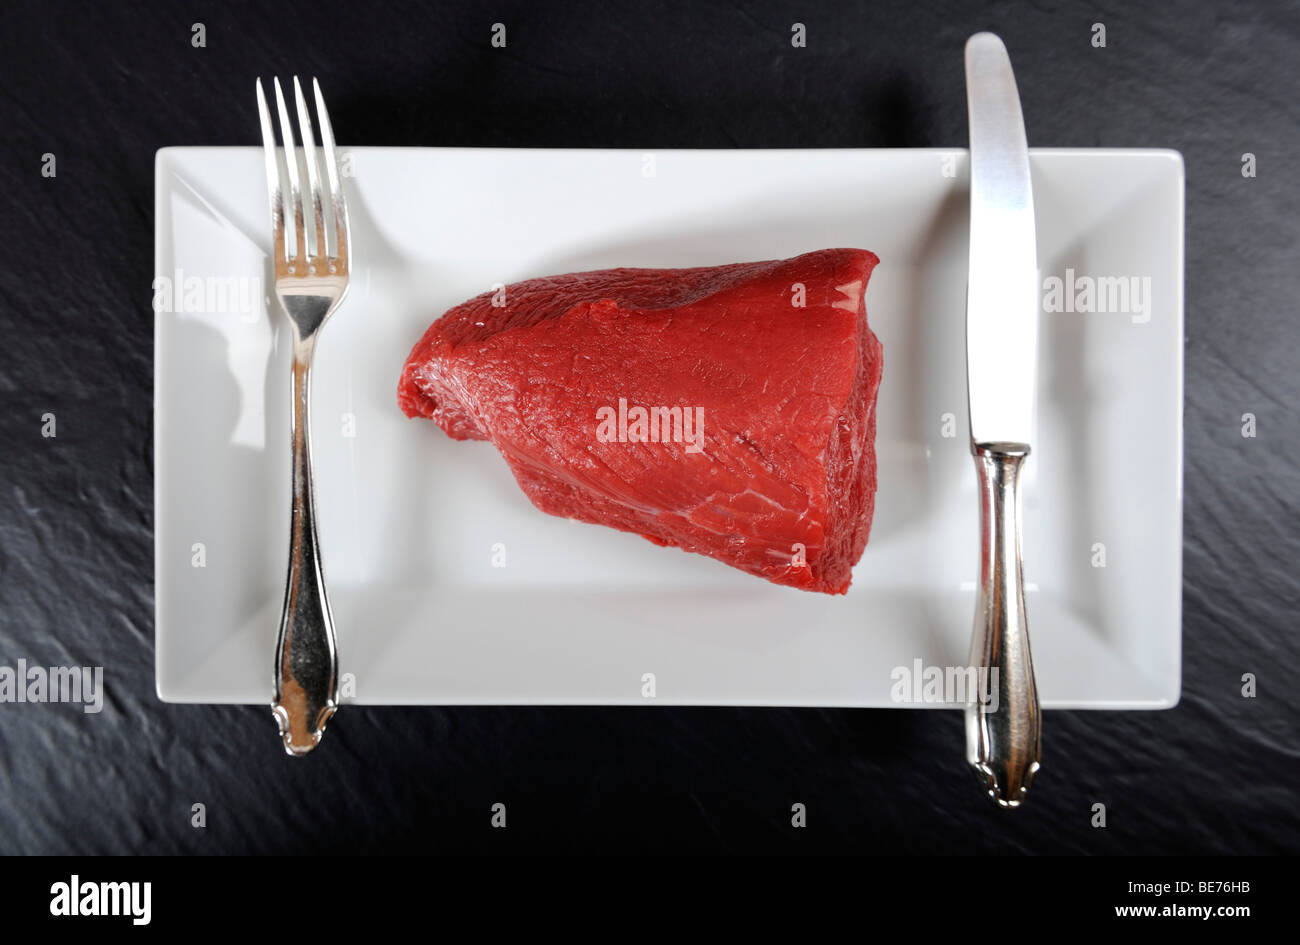 A large piece of raw beef served on a plate Stock Photo